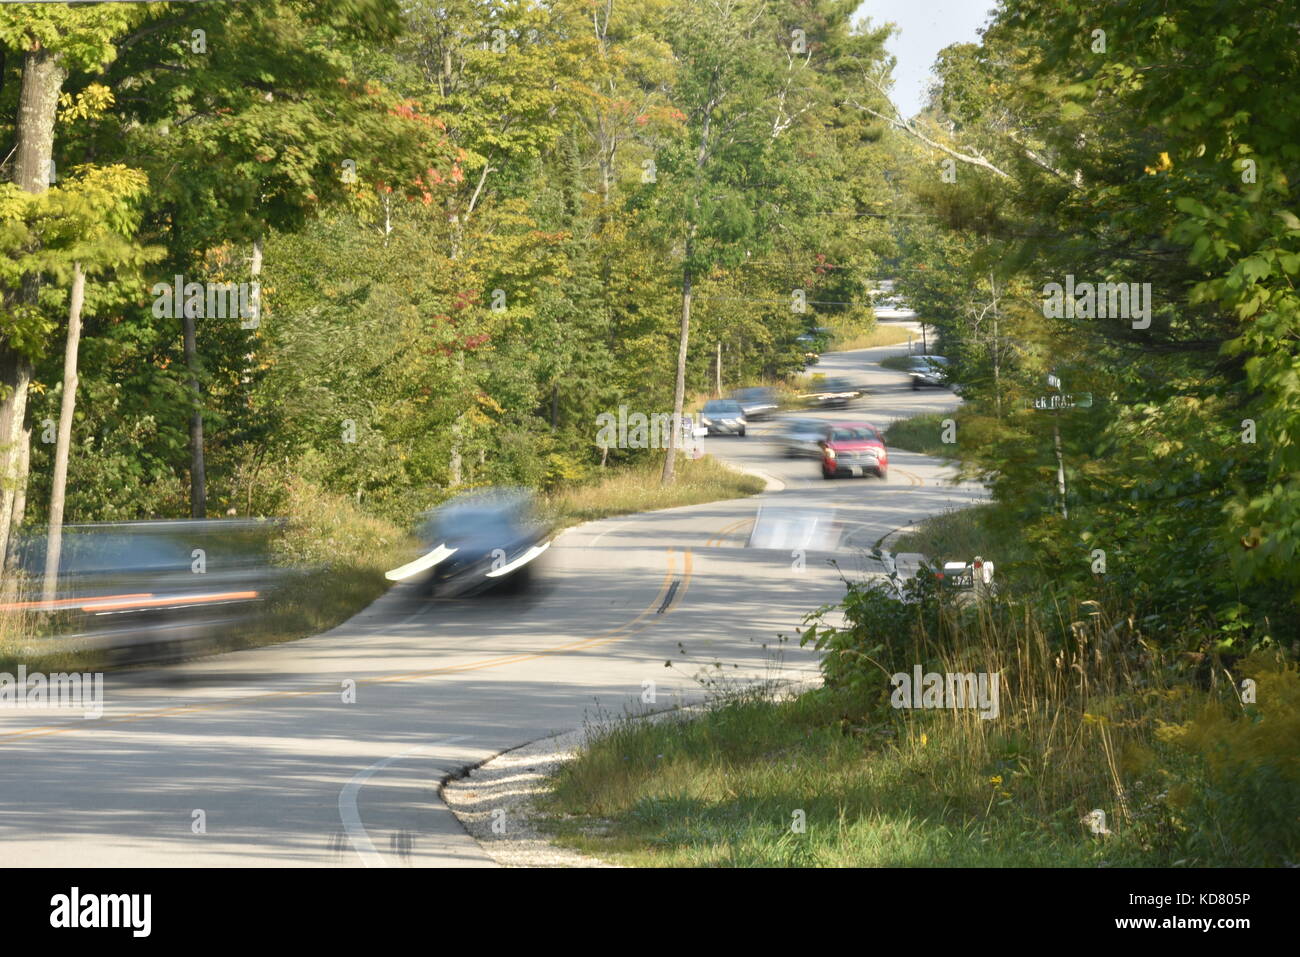 Winding, curvy road in Door County, Highway 42, near Death's Door and ferry departure point for Washington Island. Traffic coming from ferry. Stock Photo